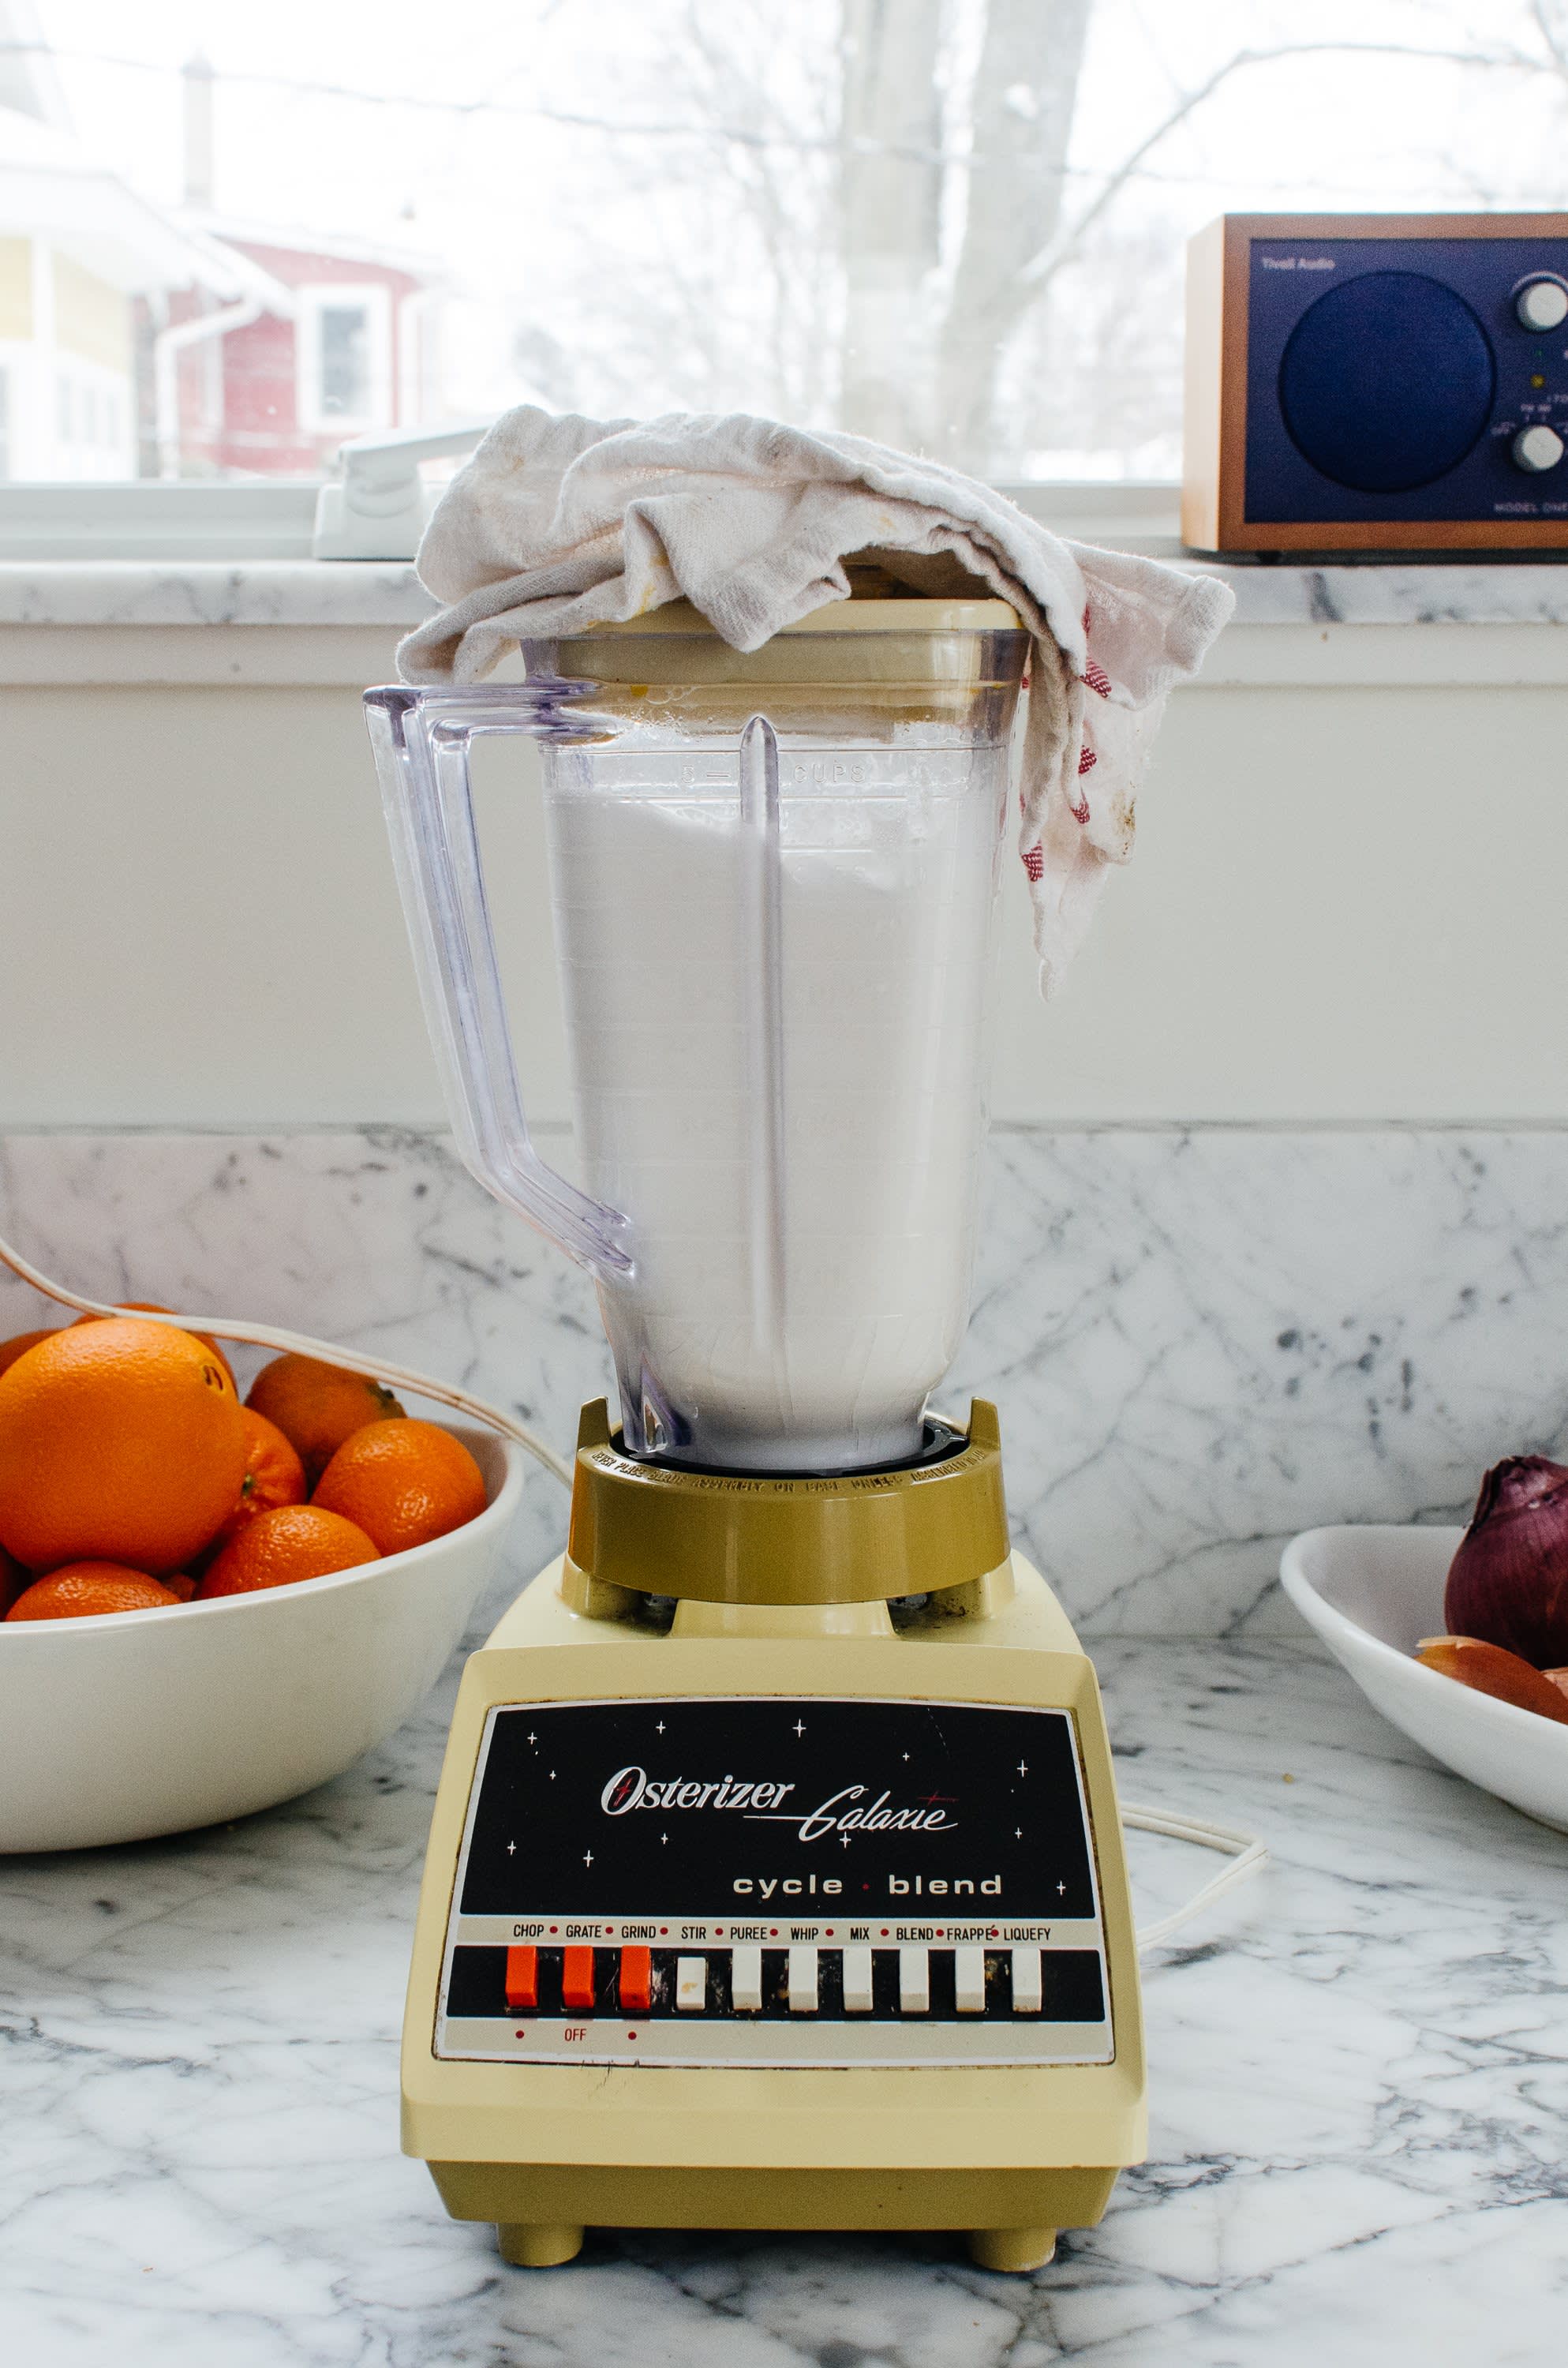 How to Clean a Blender: Easy Step-By-Step Tutorial